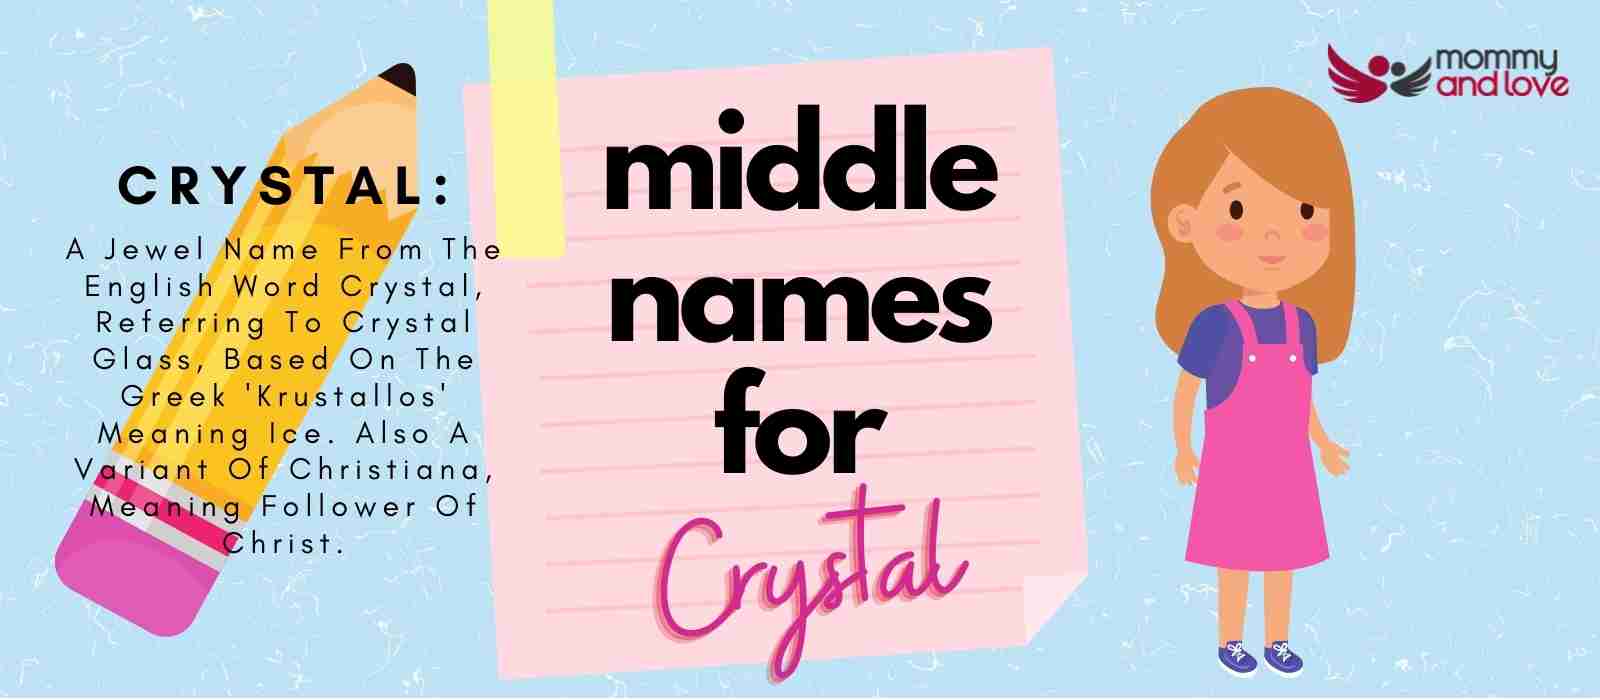 Middle Names for Crystal